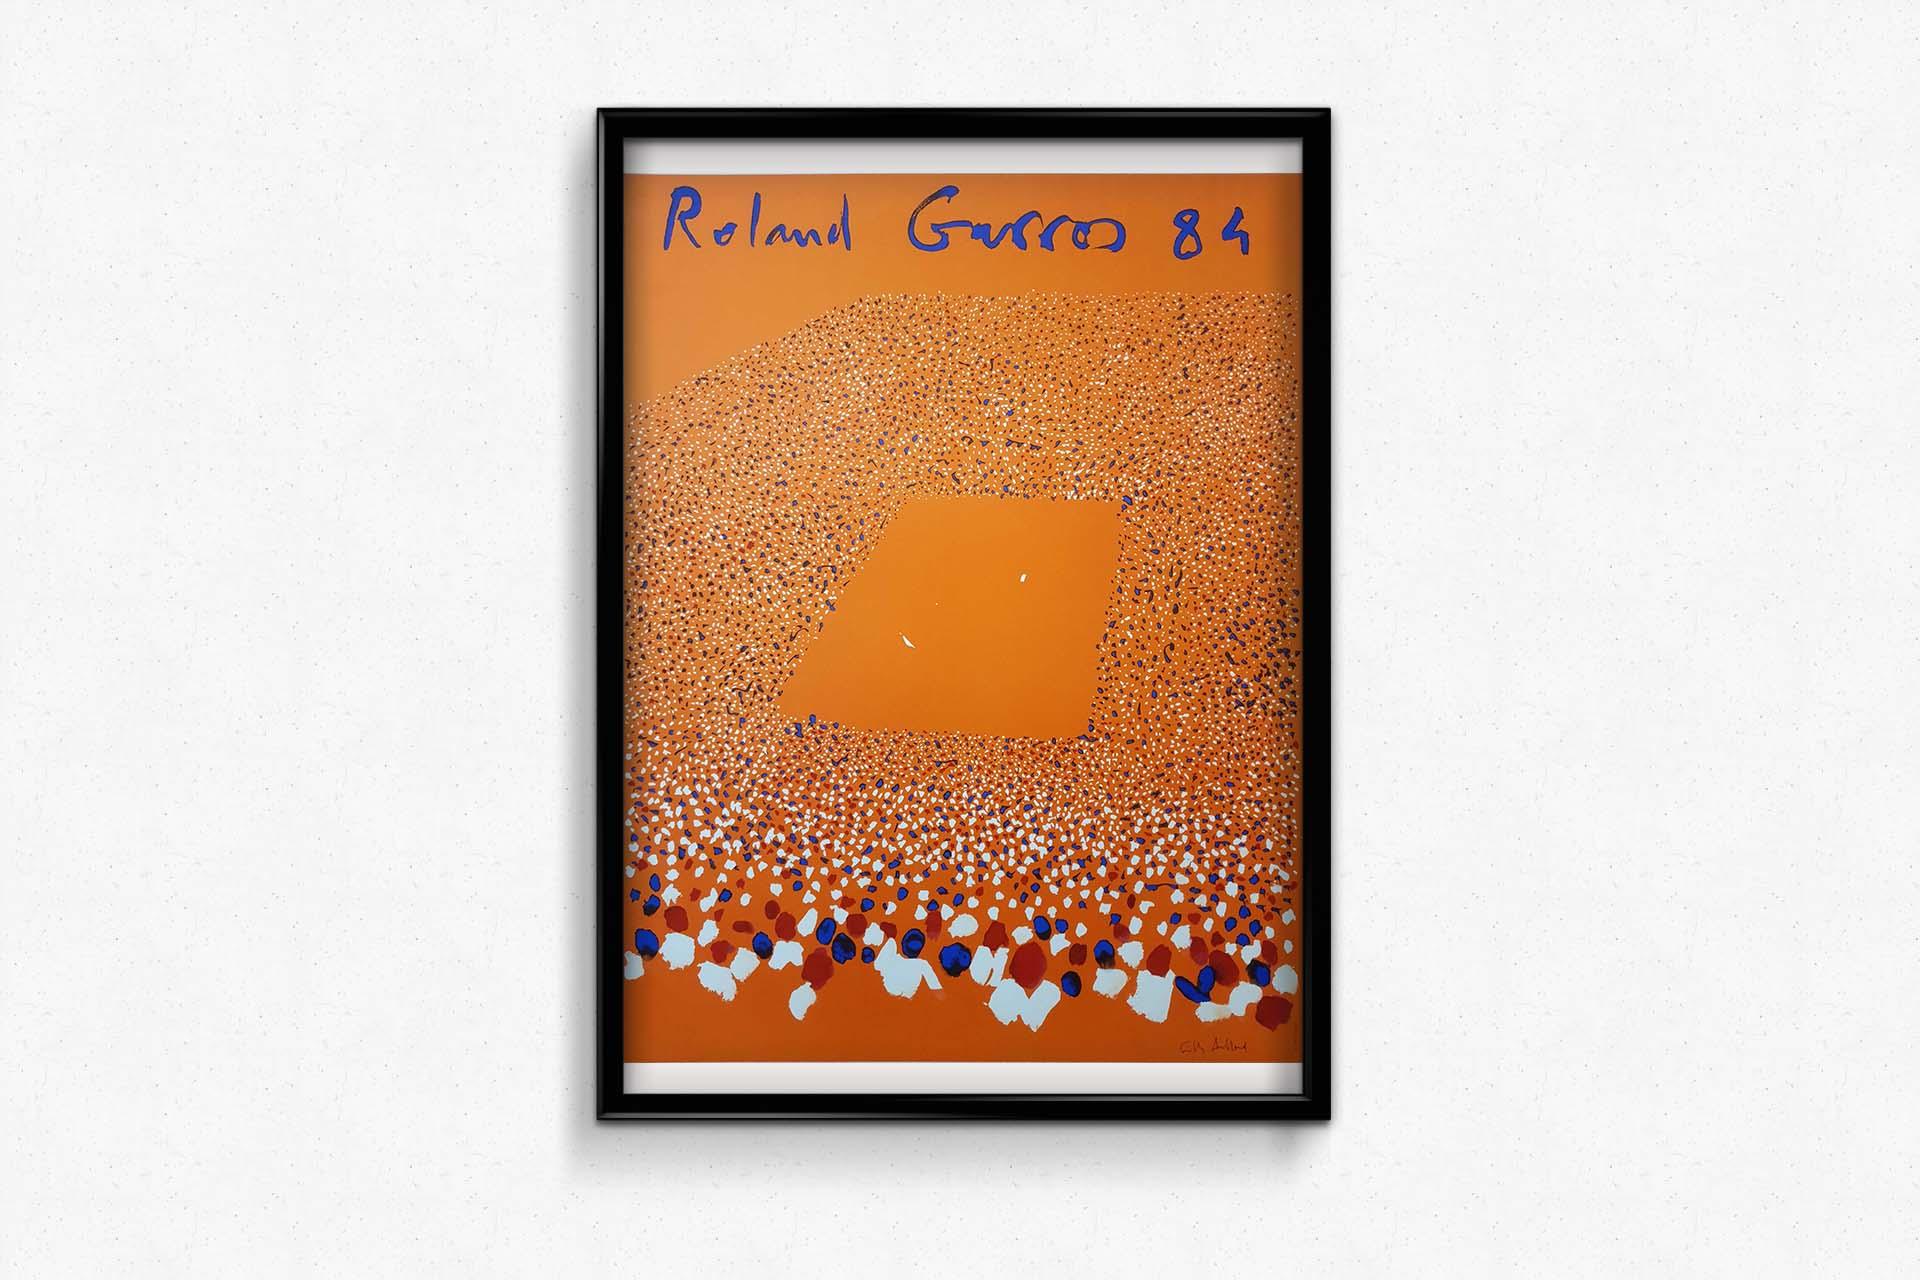 This poster is the 5th poster to promote the 1984 French Open tennis tournament (Roland Garros tournament), now called Roland Garros, which is one of the four Grand Slam tournaments.

Since 1980, the F.F.T (French Tennis Federation), in partnership